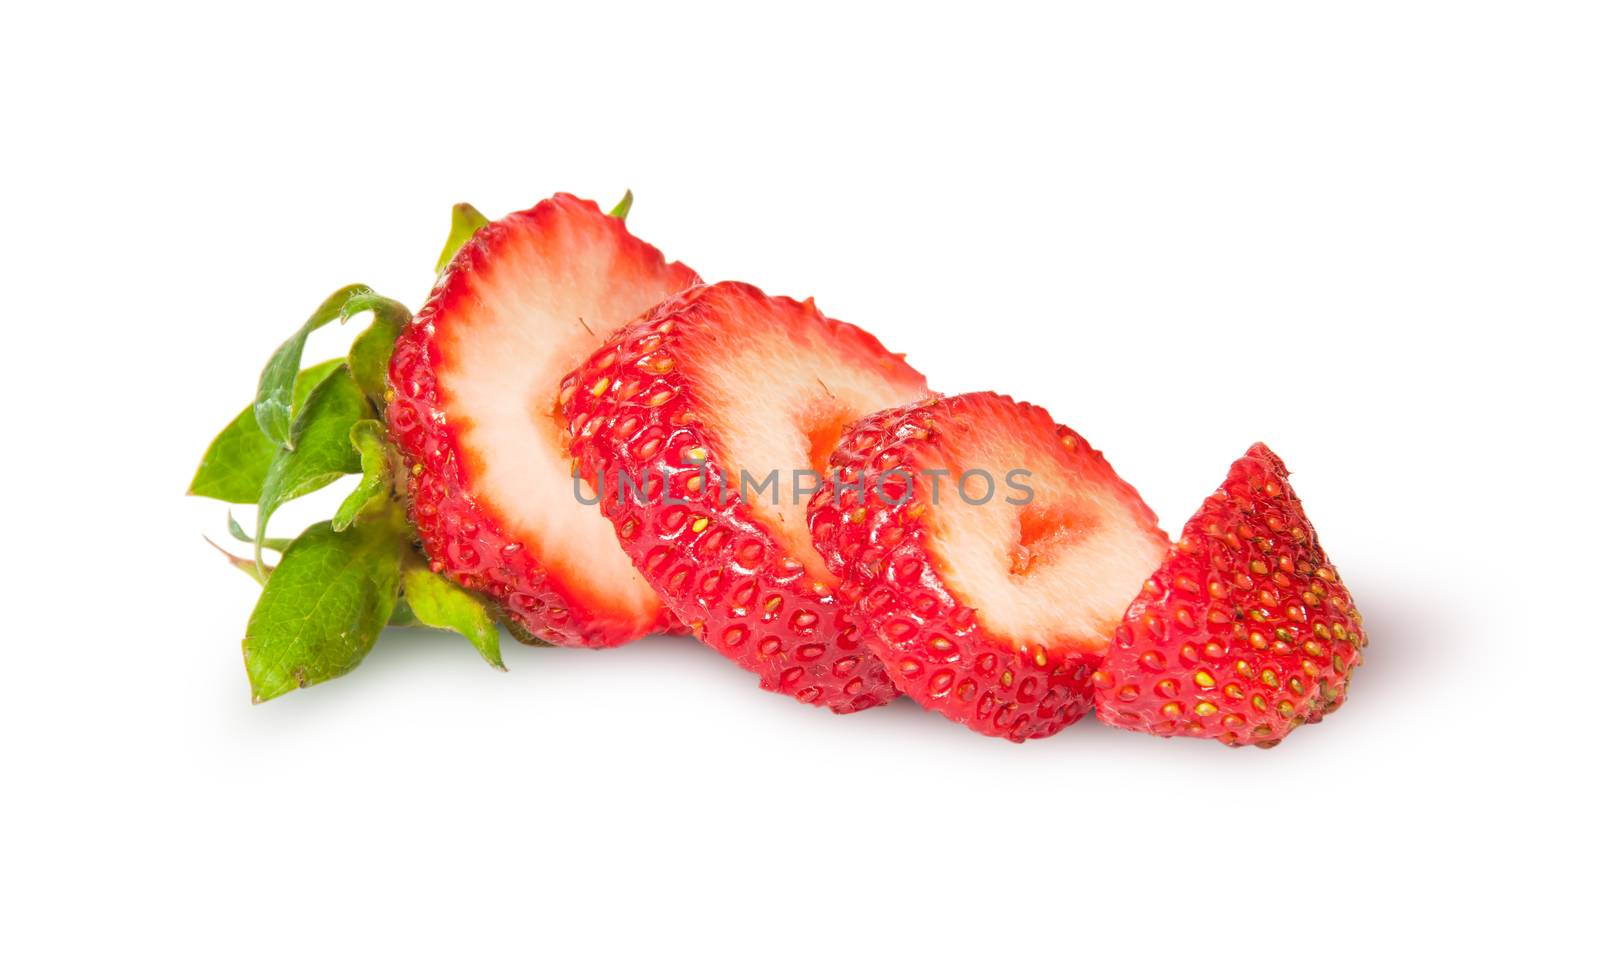 Sliced fresh juicy strawberries rotated isolated on white background